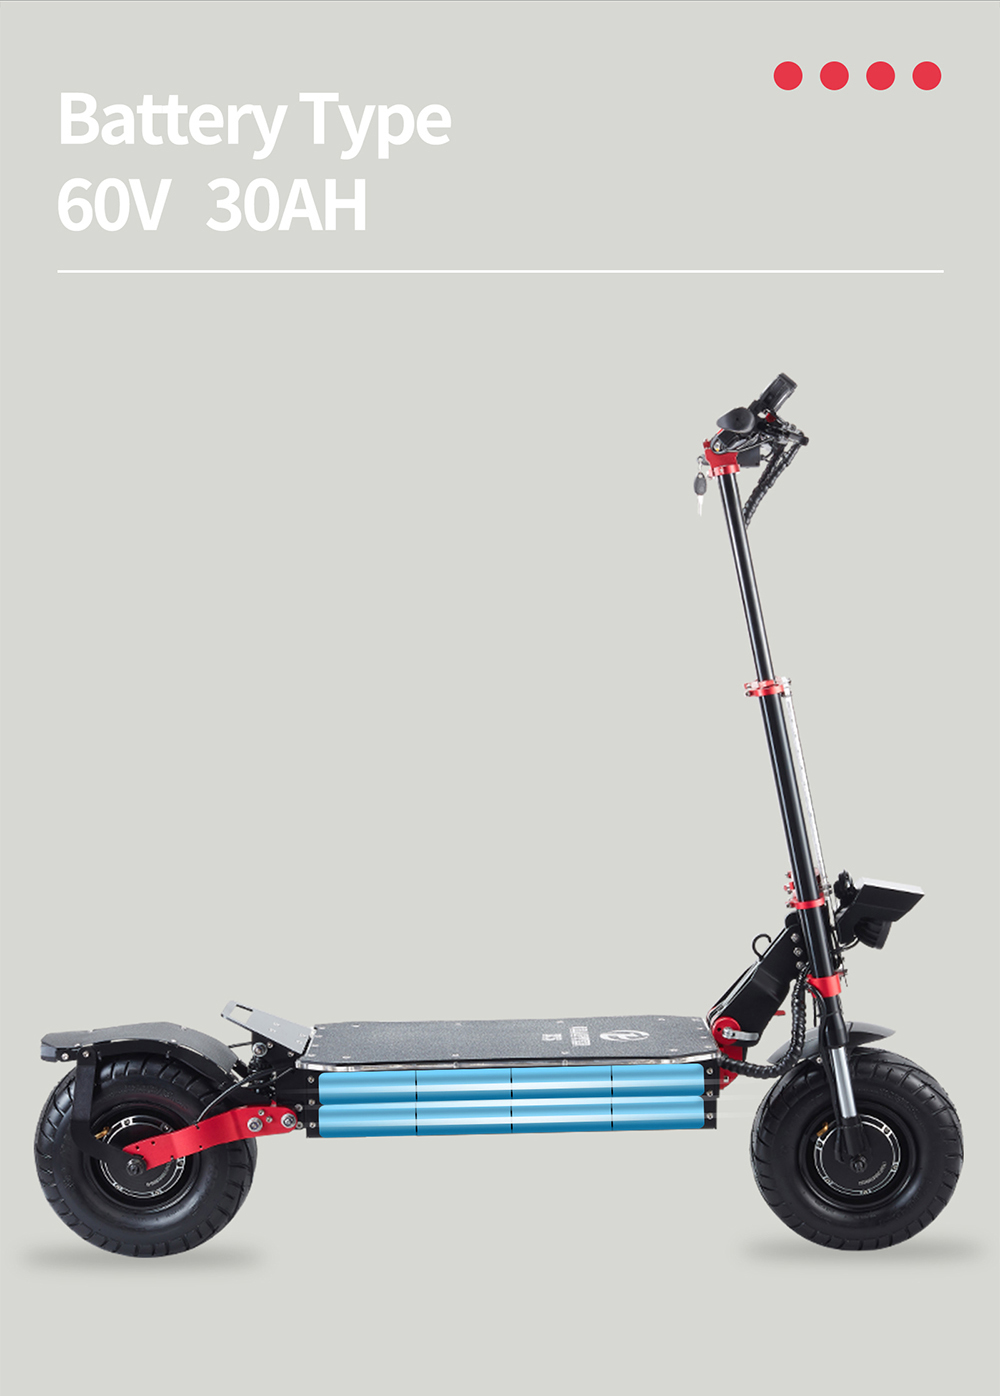 OBARTER X5 13 Off-road Tyre Foldable Electric Scooter Max Range 75KM Oil Disc Brake - 2800W x2 Motor & 60V 30Ah Battery